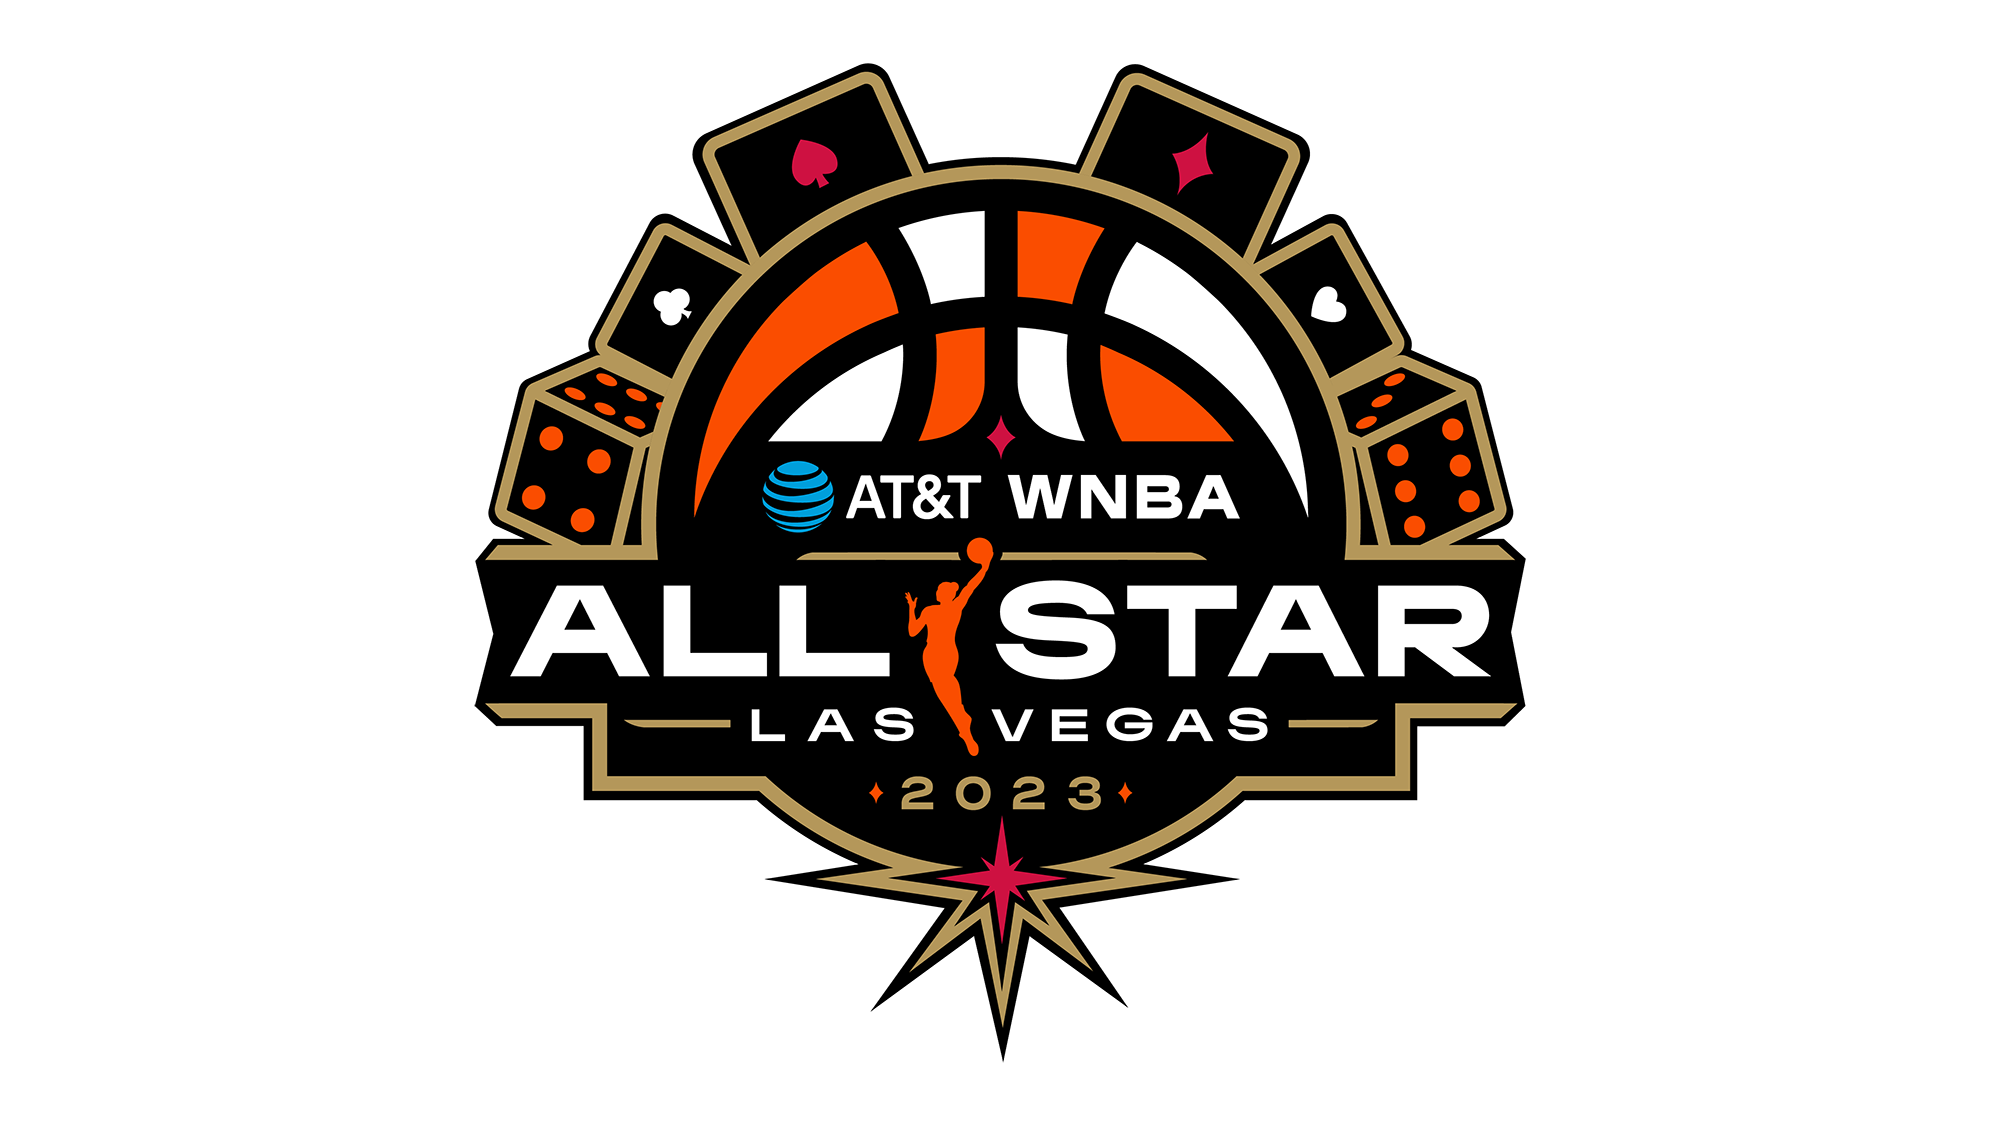 Las Vegas to host the 2023 WNBA All-Star Game –